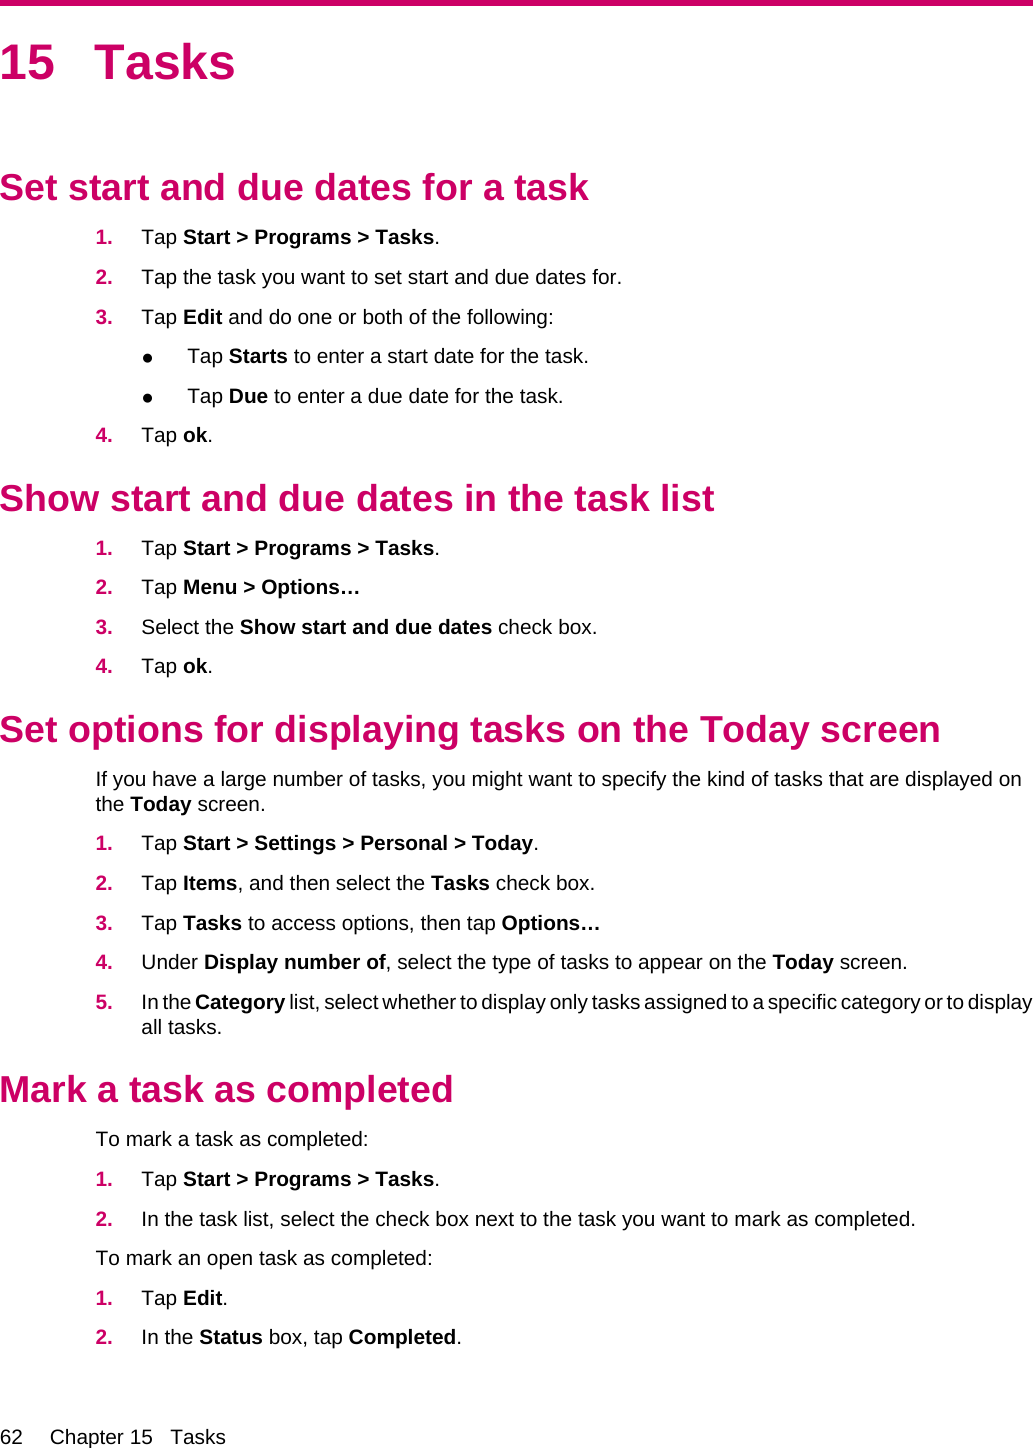 15 TasksSet start and due dates for a task1. Tap Start &gt; Programs &gt; Tasks.2. Tap the task you want to set start and due dates for.3. Tap Edit and do one or both of the following:●Tap Starts to enter a start date for the task.●Tap Due to enter a due date for the task.4. Tap ok.Show start and due dates in the task list1. Tap Start &gt; Programs &gt; Tasks.2. Tap Menu &gt; Options…3. Select the Show start and due dates check box.4. Tap ok.Set options for displaying tasks on the Today screenIf you have a large number of tasks, you might want to specify the kind of tasks that are displayed onthe Today screen.1. Tap Start &gt; Settings &gt; Personal &gt; Today.2. Tap Items, and then select the Tasks check box.3. Tap Tasks to access options, then tap Options…4. Under Display number of, select the type of tasks to appear on the Today screen.5. In the Category list, select whether to display only tasks assigned to a specific category or to displayall tasks.Mark a task as completedTo mark a task as completed:1. Tap Start &gt; Programs &gt; Tasks.2. In the task list, select the check box next to the task you want to mark as completed.To mark an open task as completed:1. Tap Edit.2. In the Status box, tap Completed.62 Chapter 15   Tasks